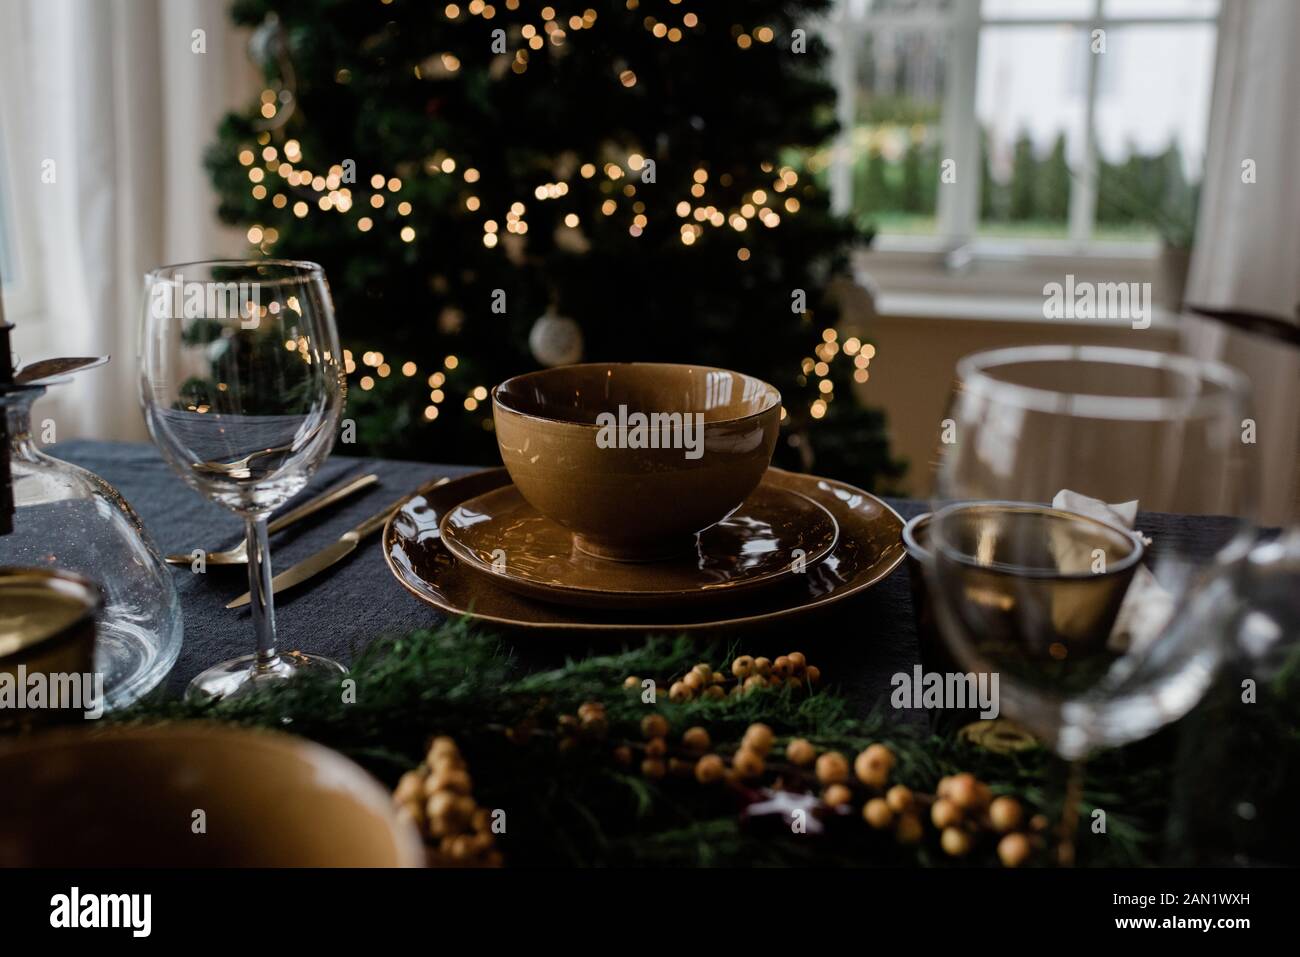 place setting on a decorated festive table setting Stock Photo